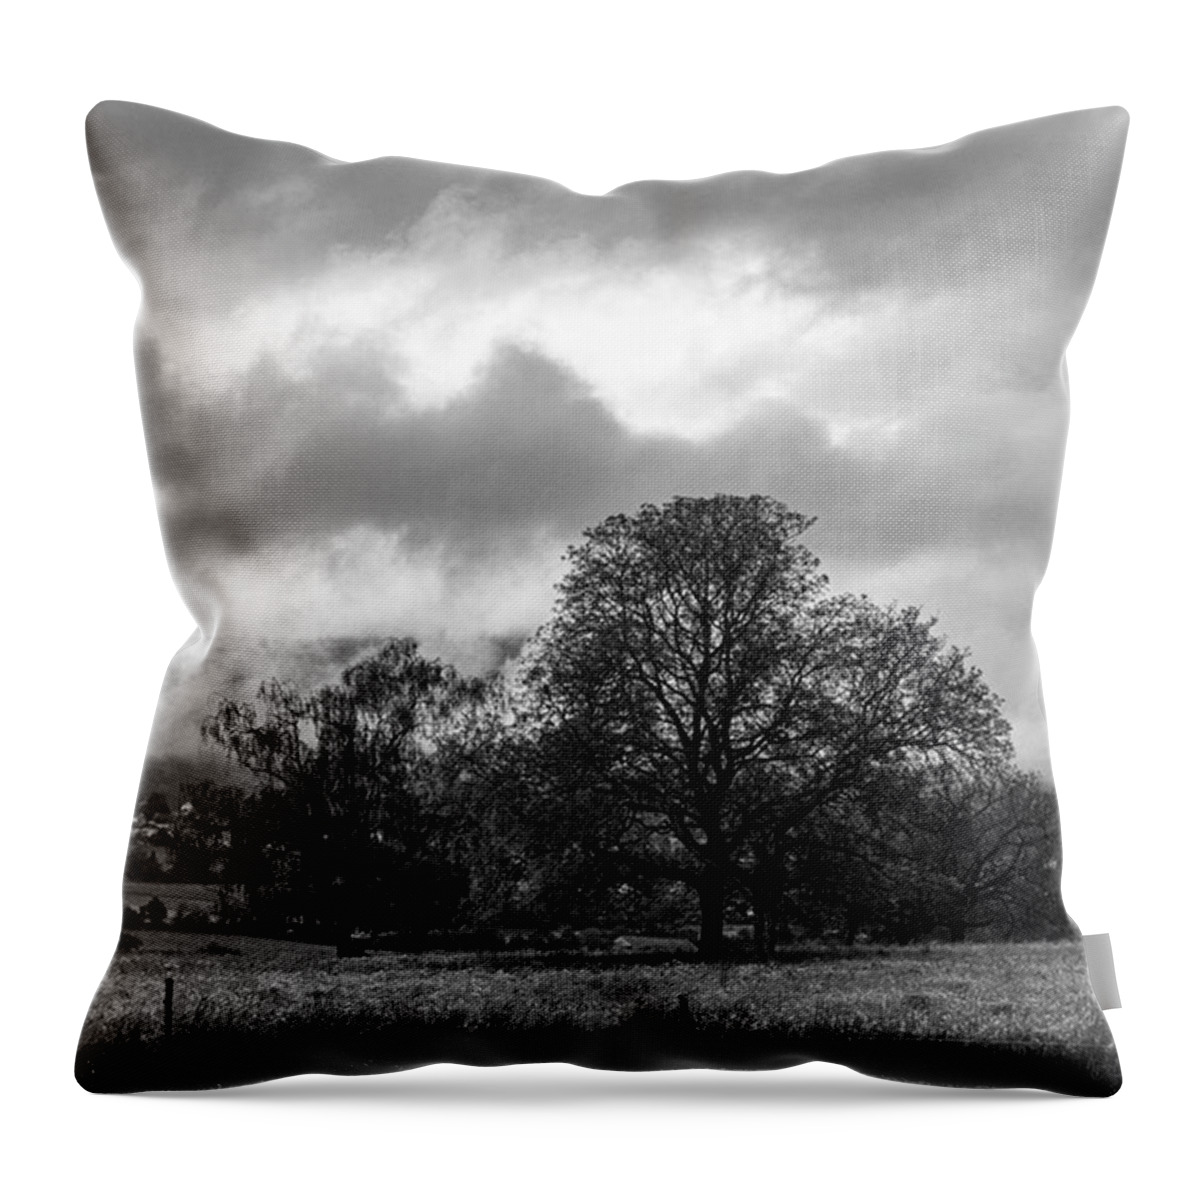 Misty Throw Pillow featuring the photograph Morning View by Aleck Cartwright